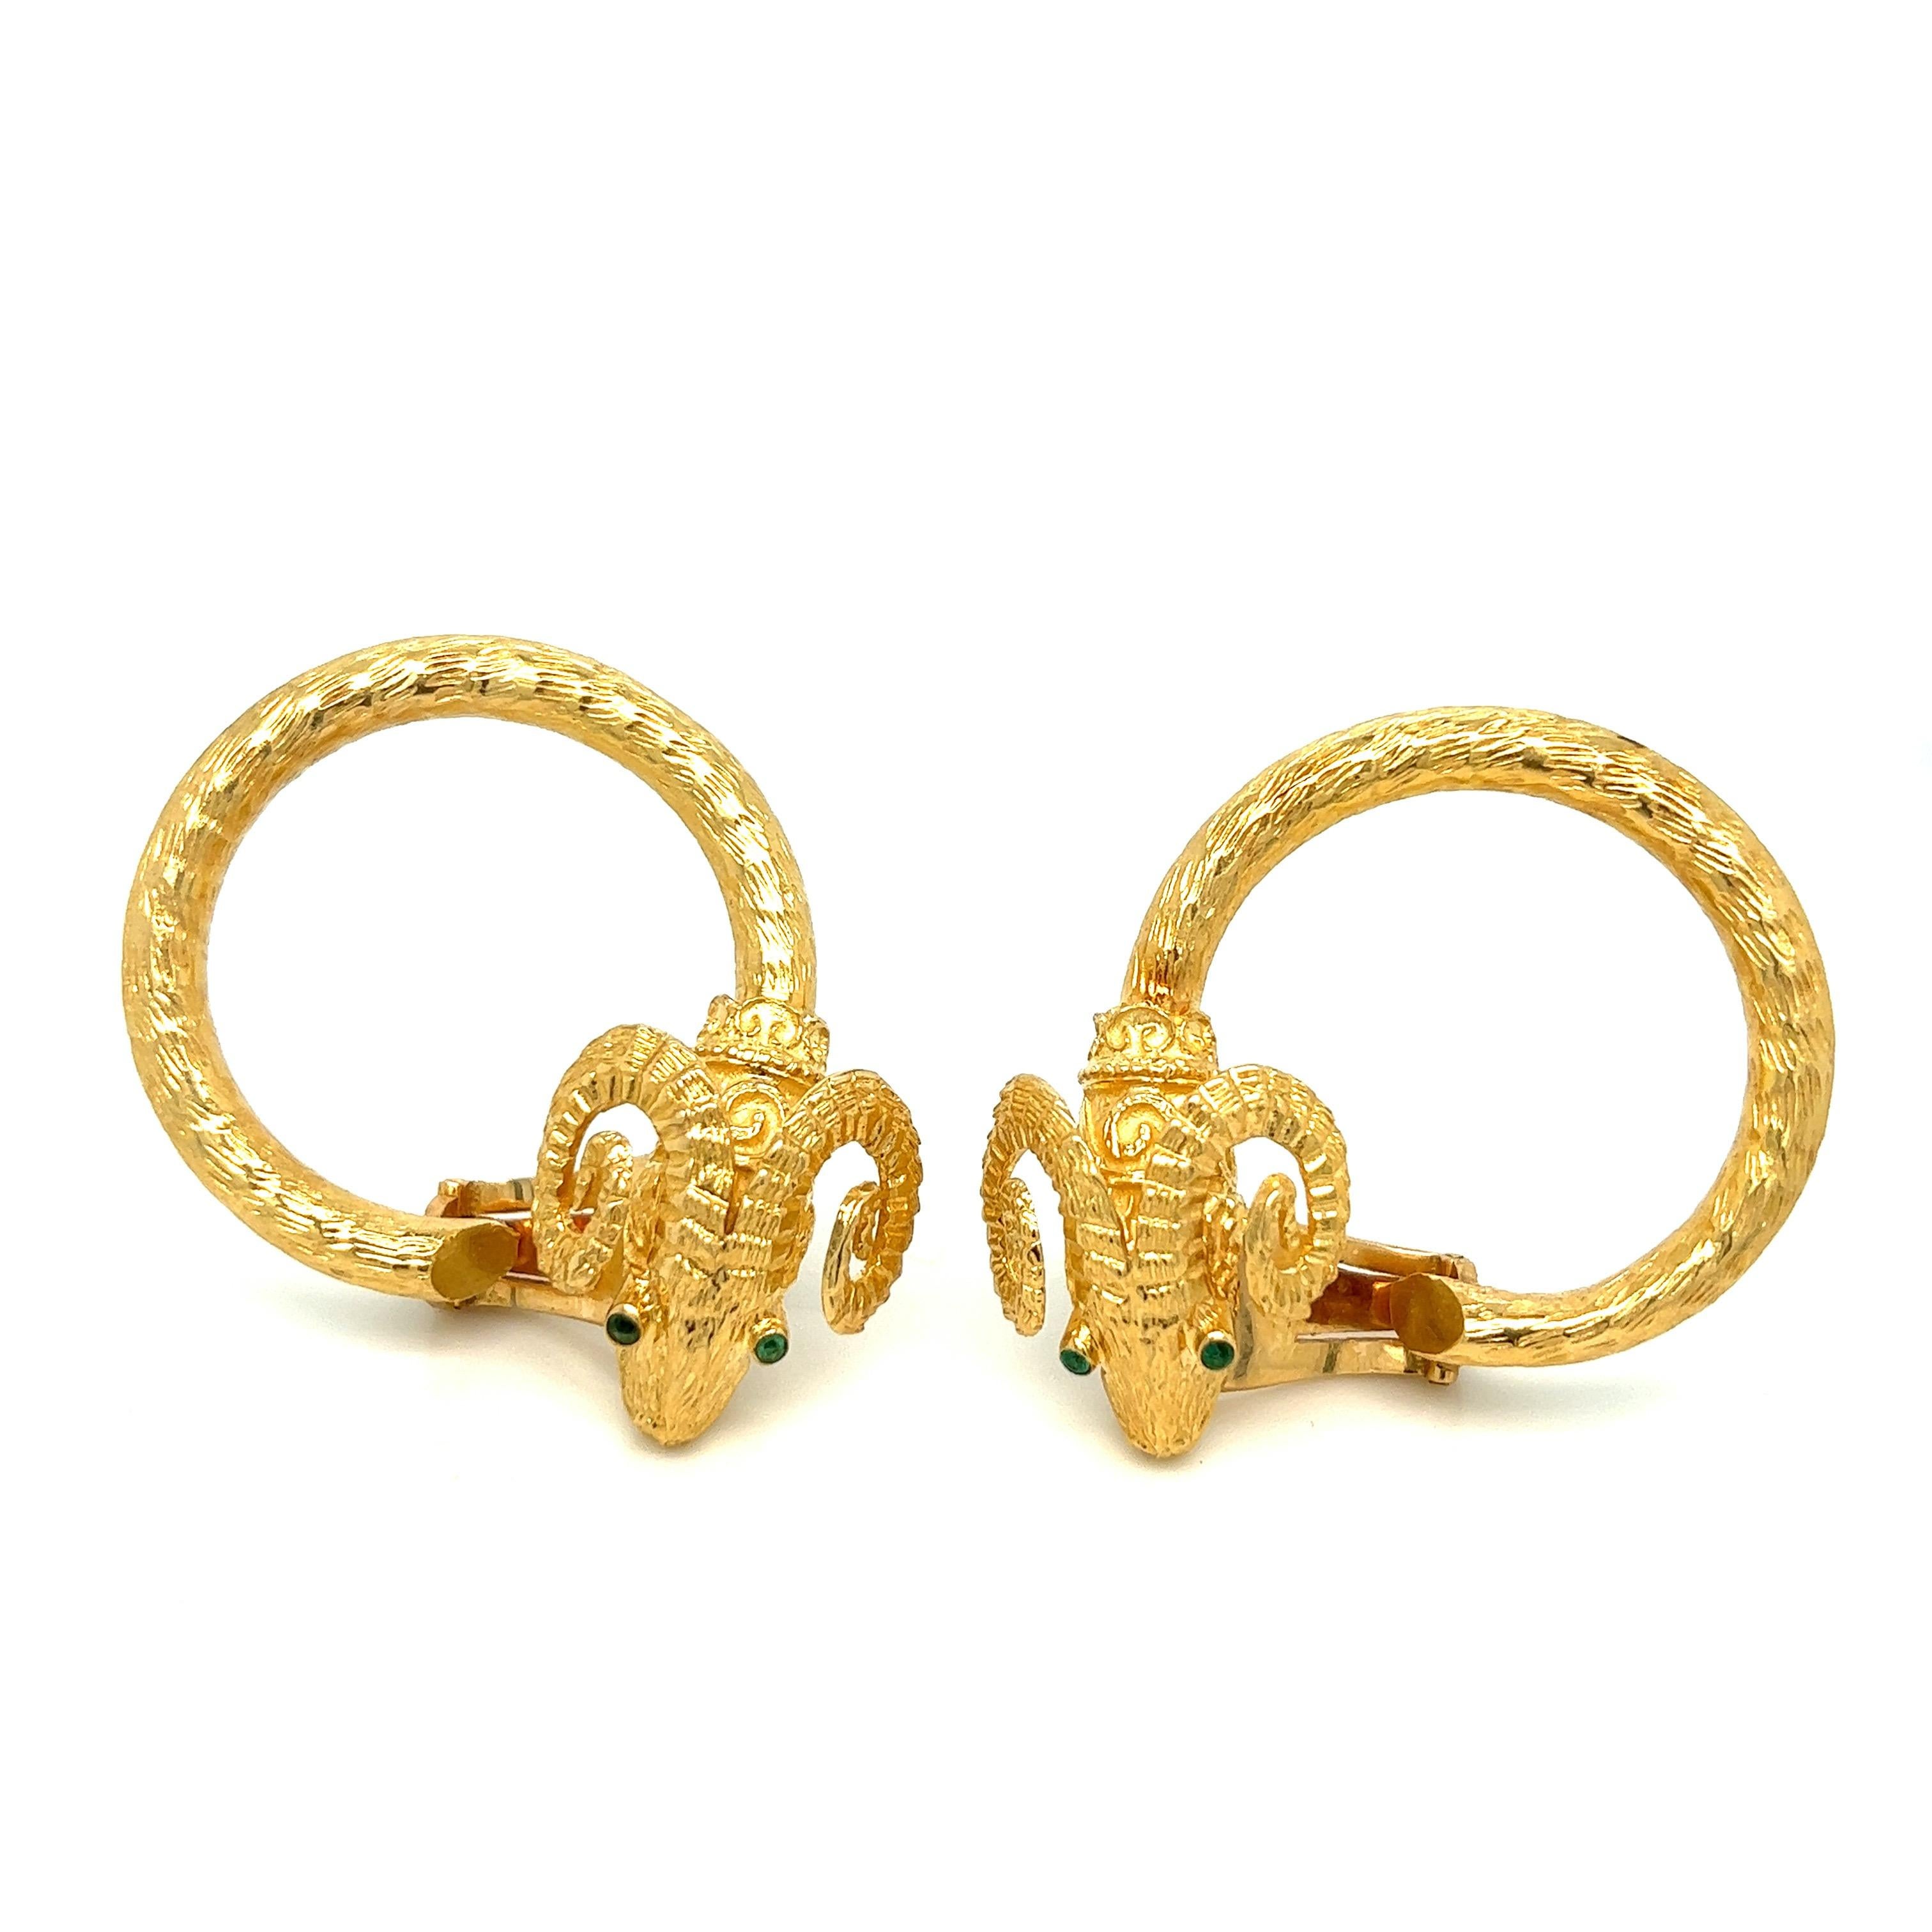 Ram's head gold ear clips

Hoops with ram's head at the end, 18 karat yellow gold, emerald stones for eyes; marked 750

Size: width 1.5 inches, length 1.5 inches
Total weight: 23.2 grams